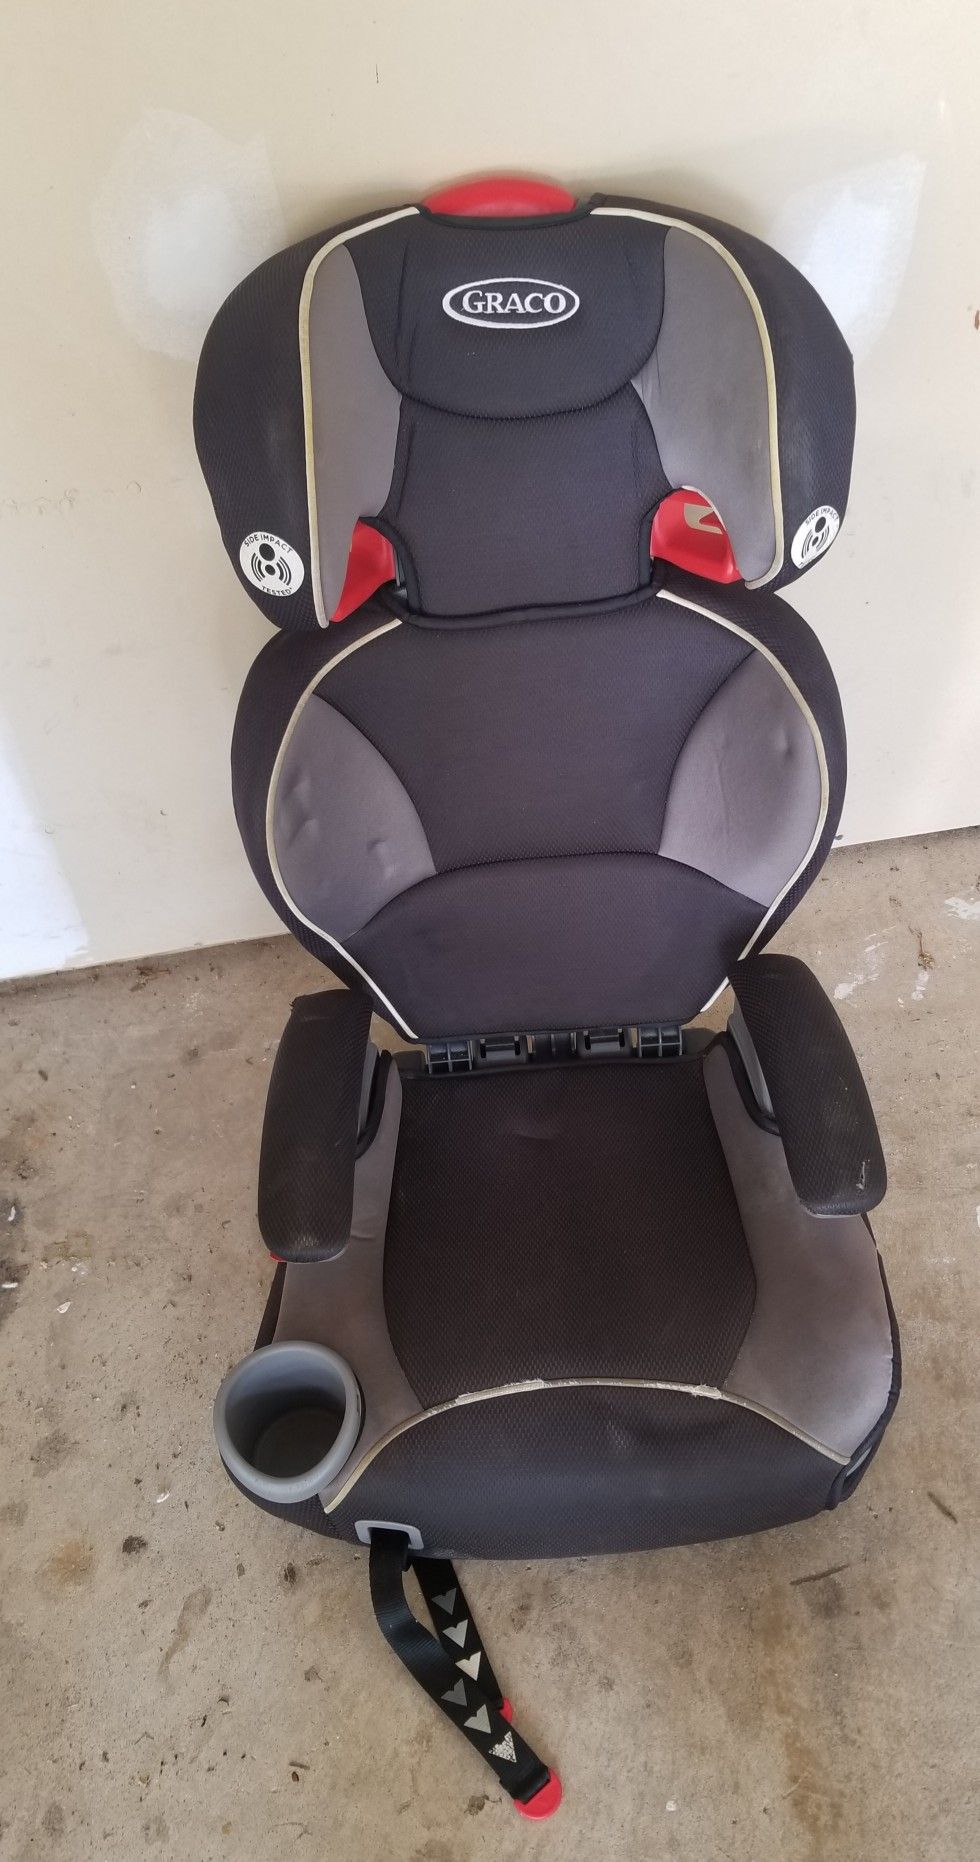 Graco Affix booster seat